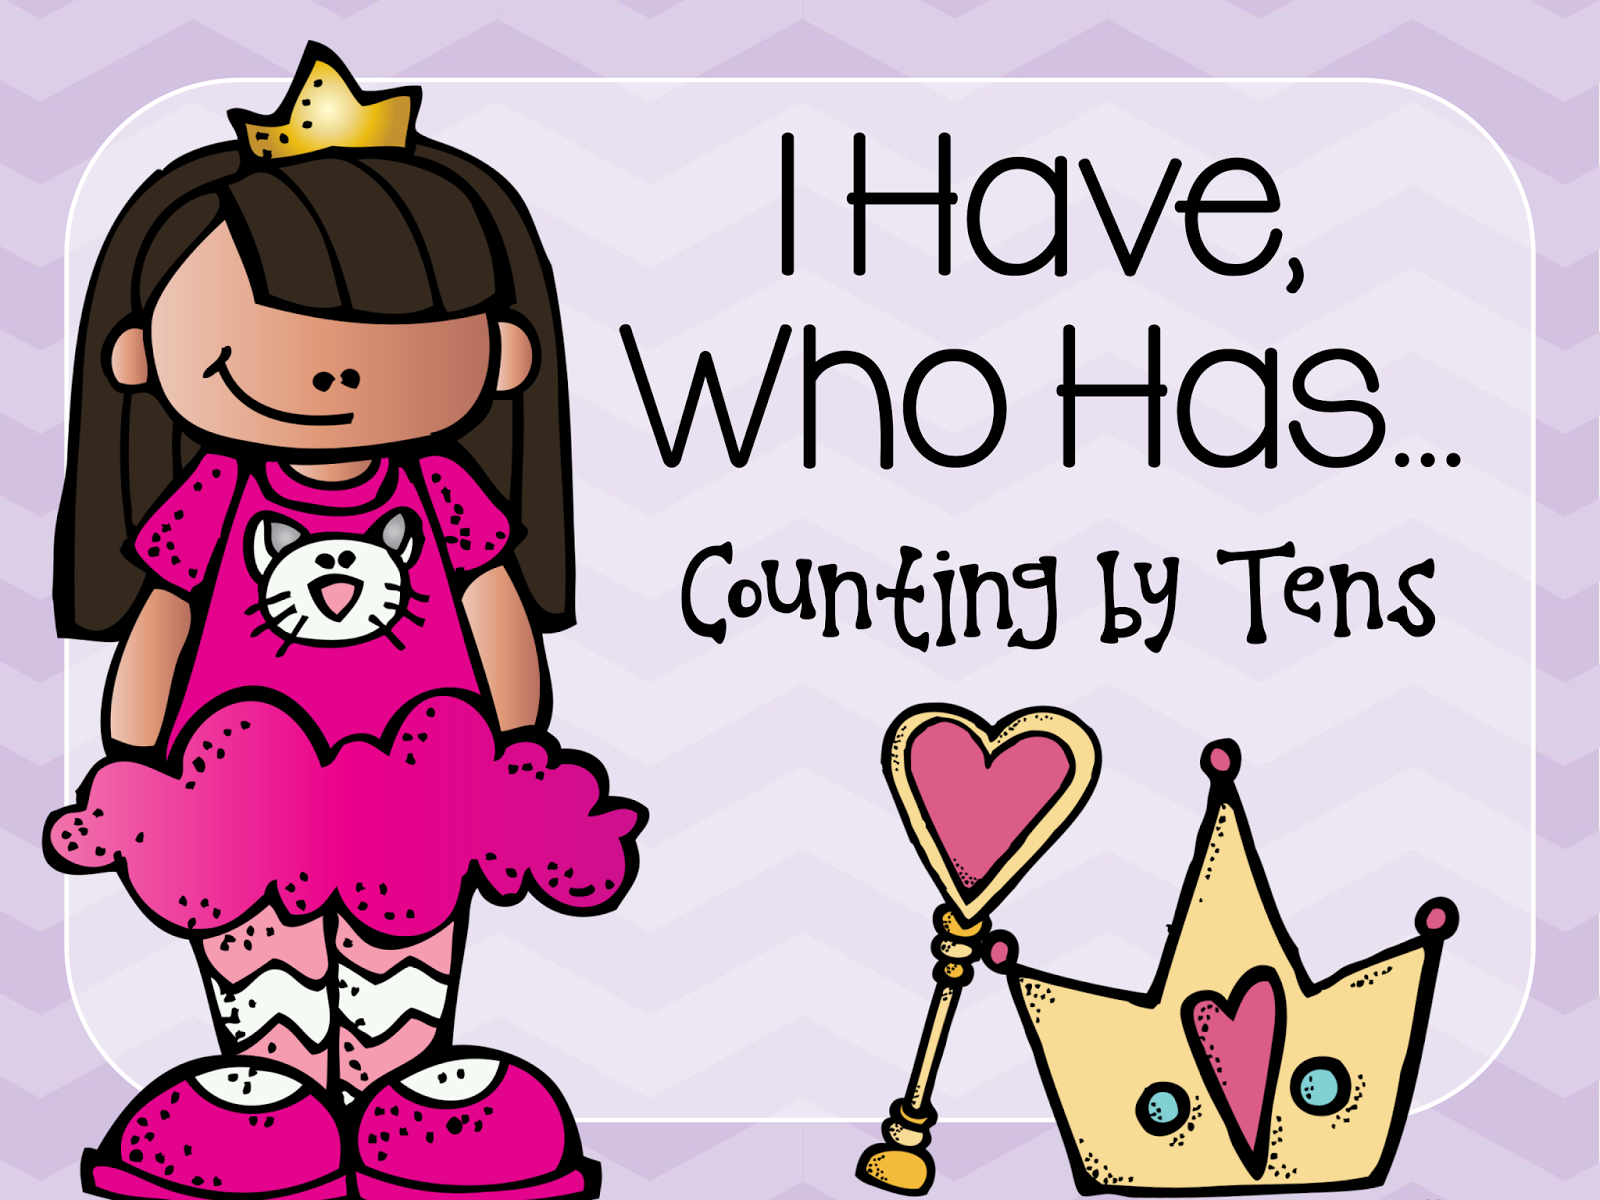 http://www.teachersnotebook.com/product/preciousmoments84/i-have-who-has-counting-by-tens